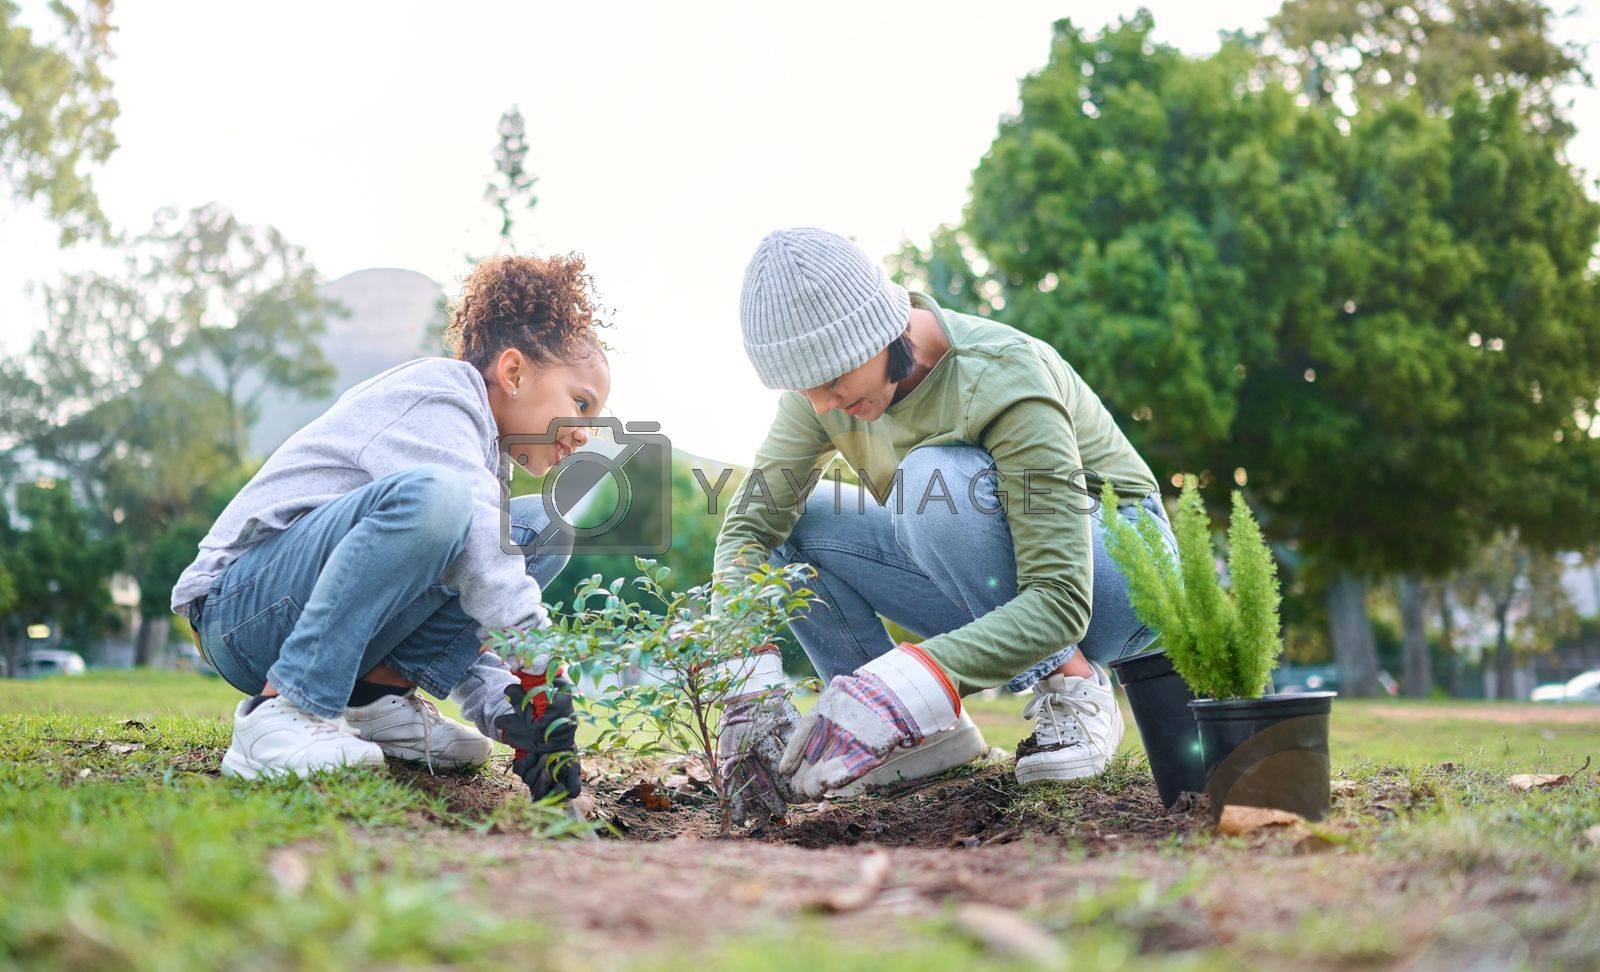 Royalty free image of Family, plant and gardening in a park with trees in nature environment, agriculture or garden. Volunteer woman and child planting for growth, ecology and sustainability for community on Earth day by YuriArcurs